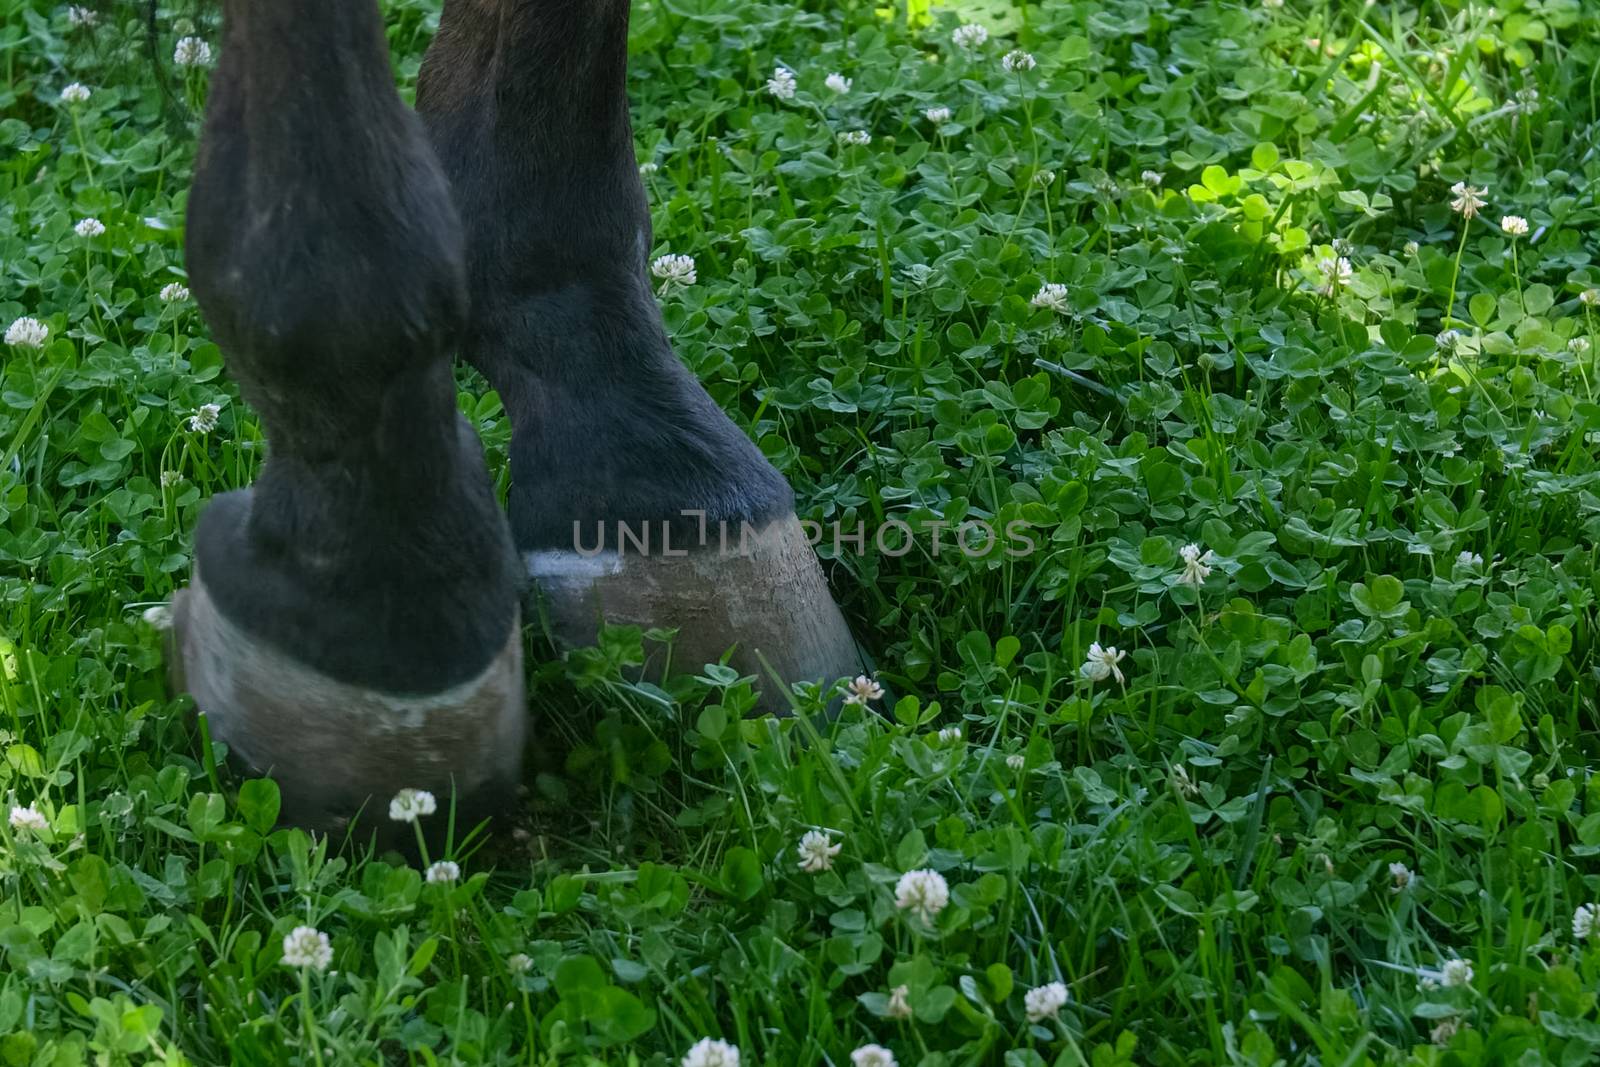 Horse hooves on the lawn. Horse grazing.